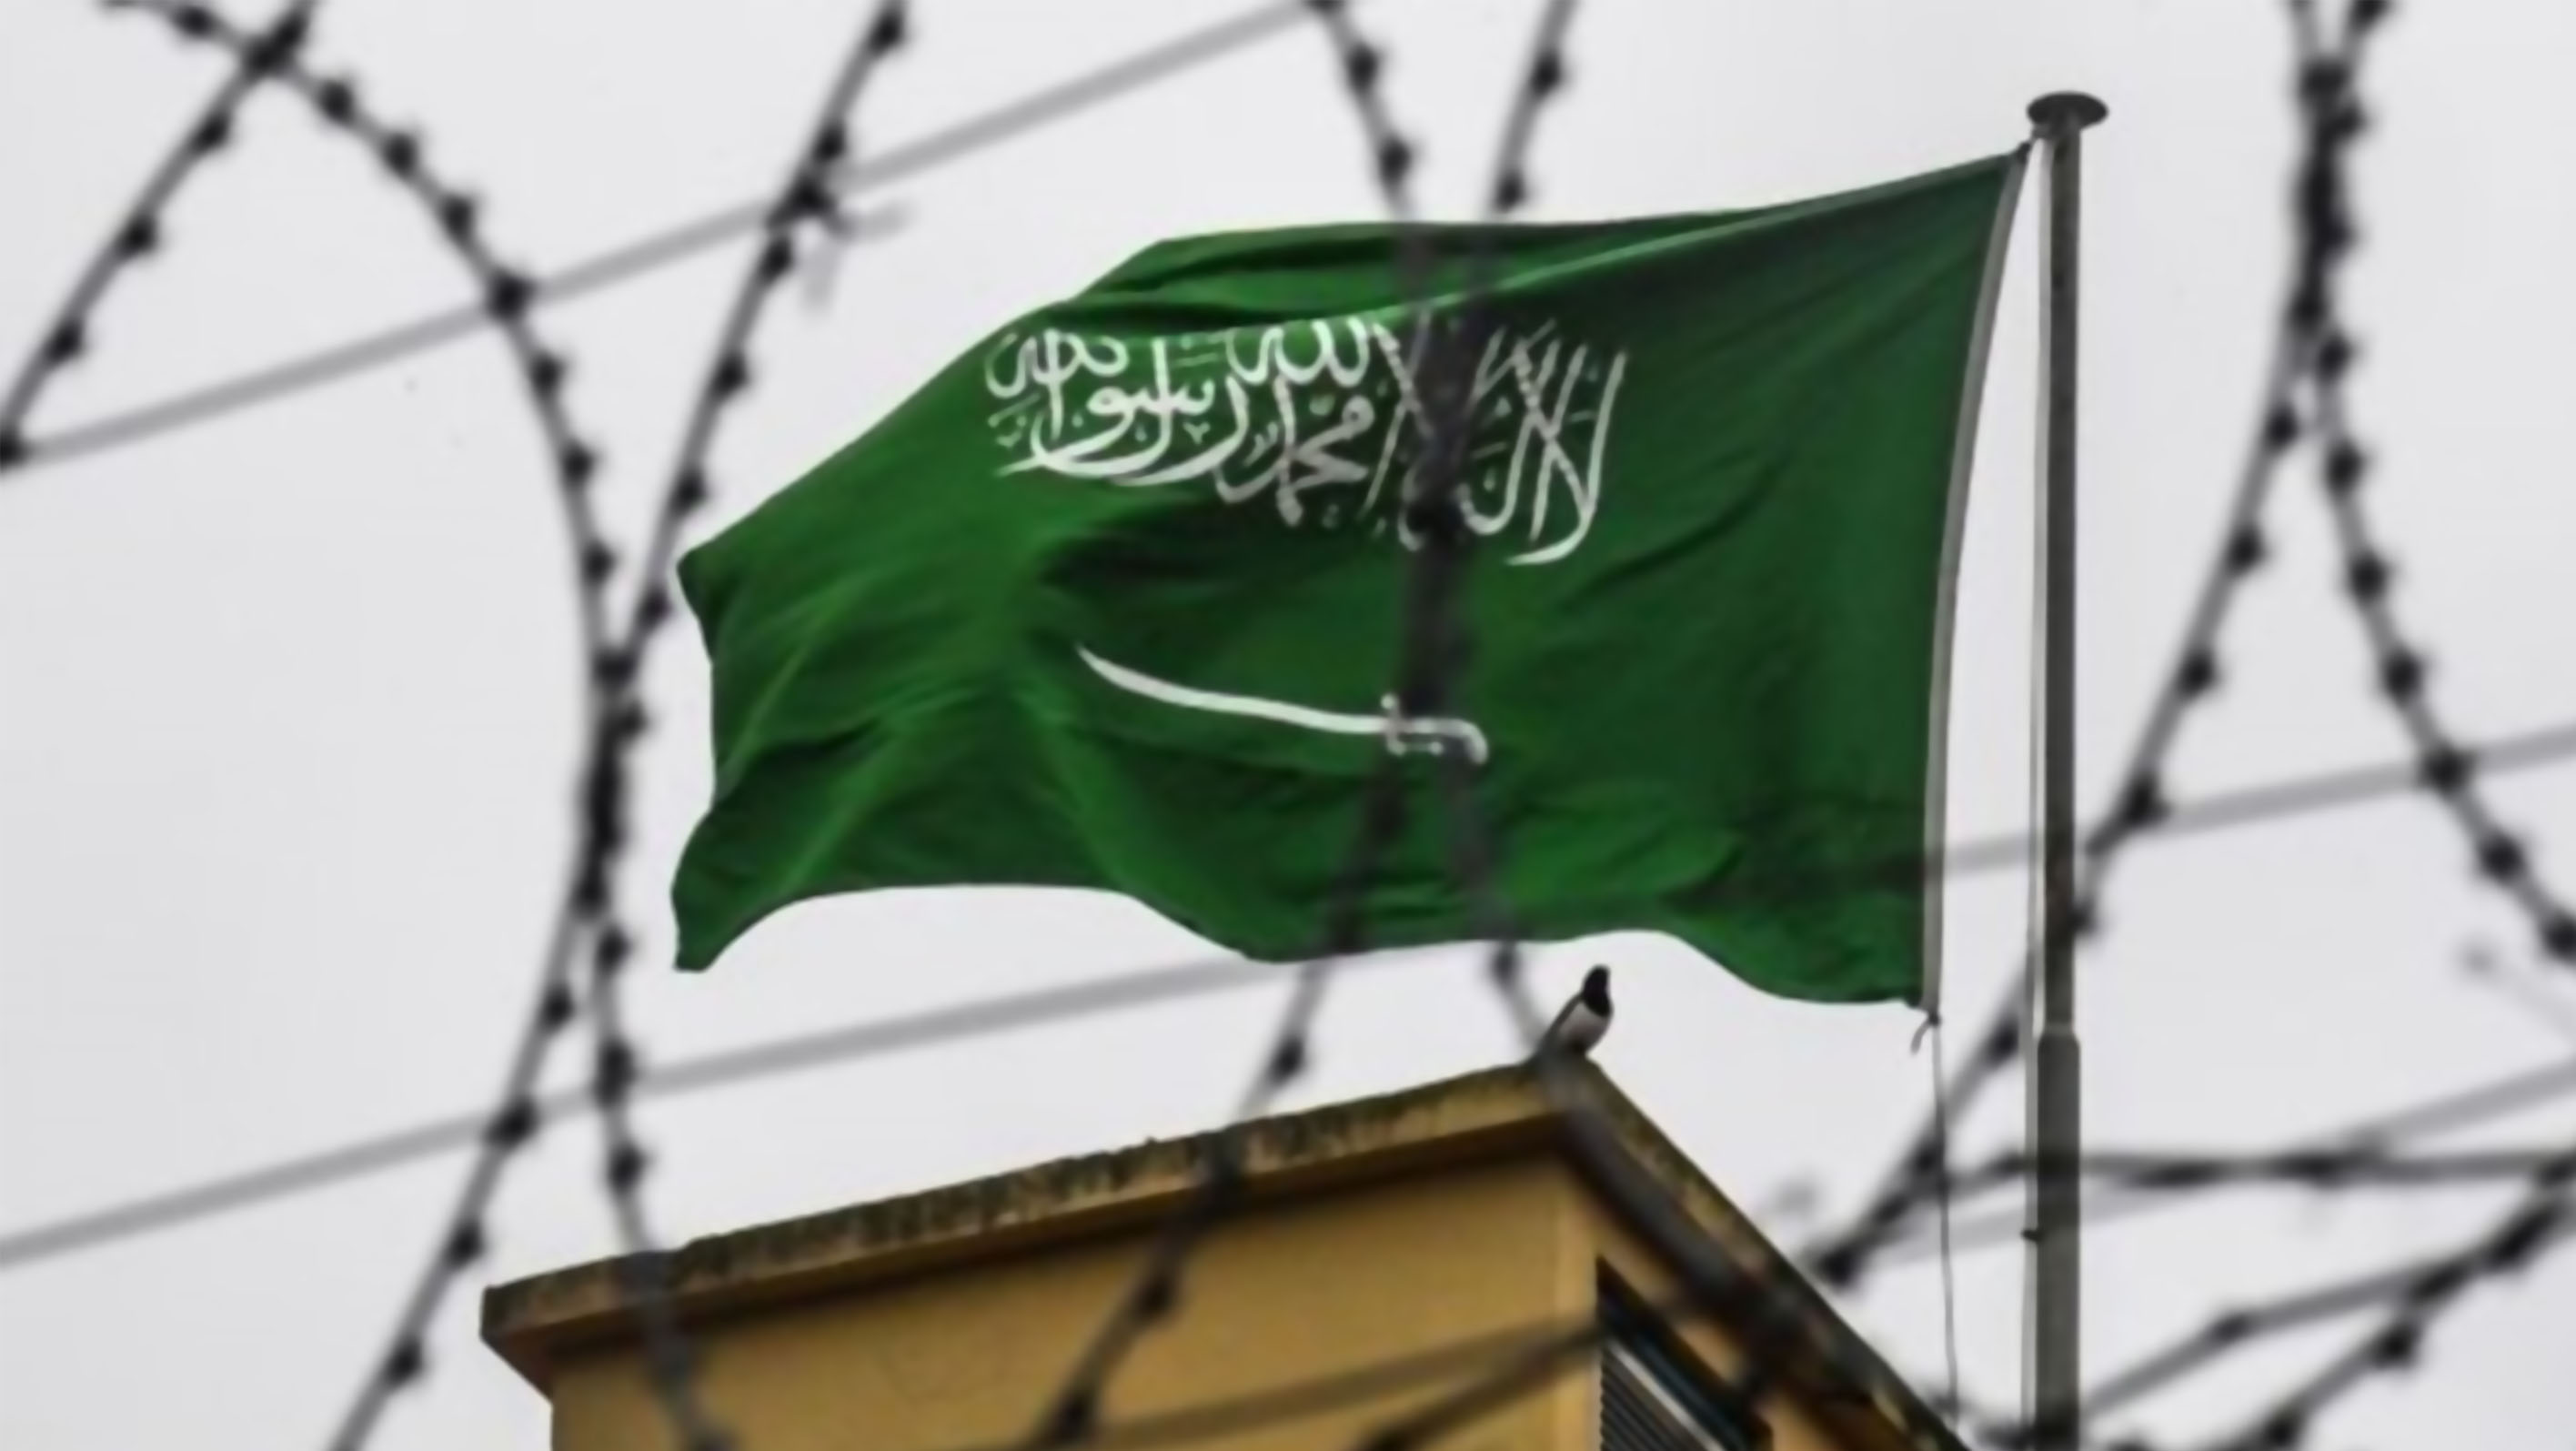 WJWC urges Saudi authorities to release prisoners of conscience